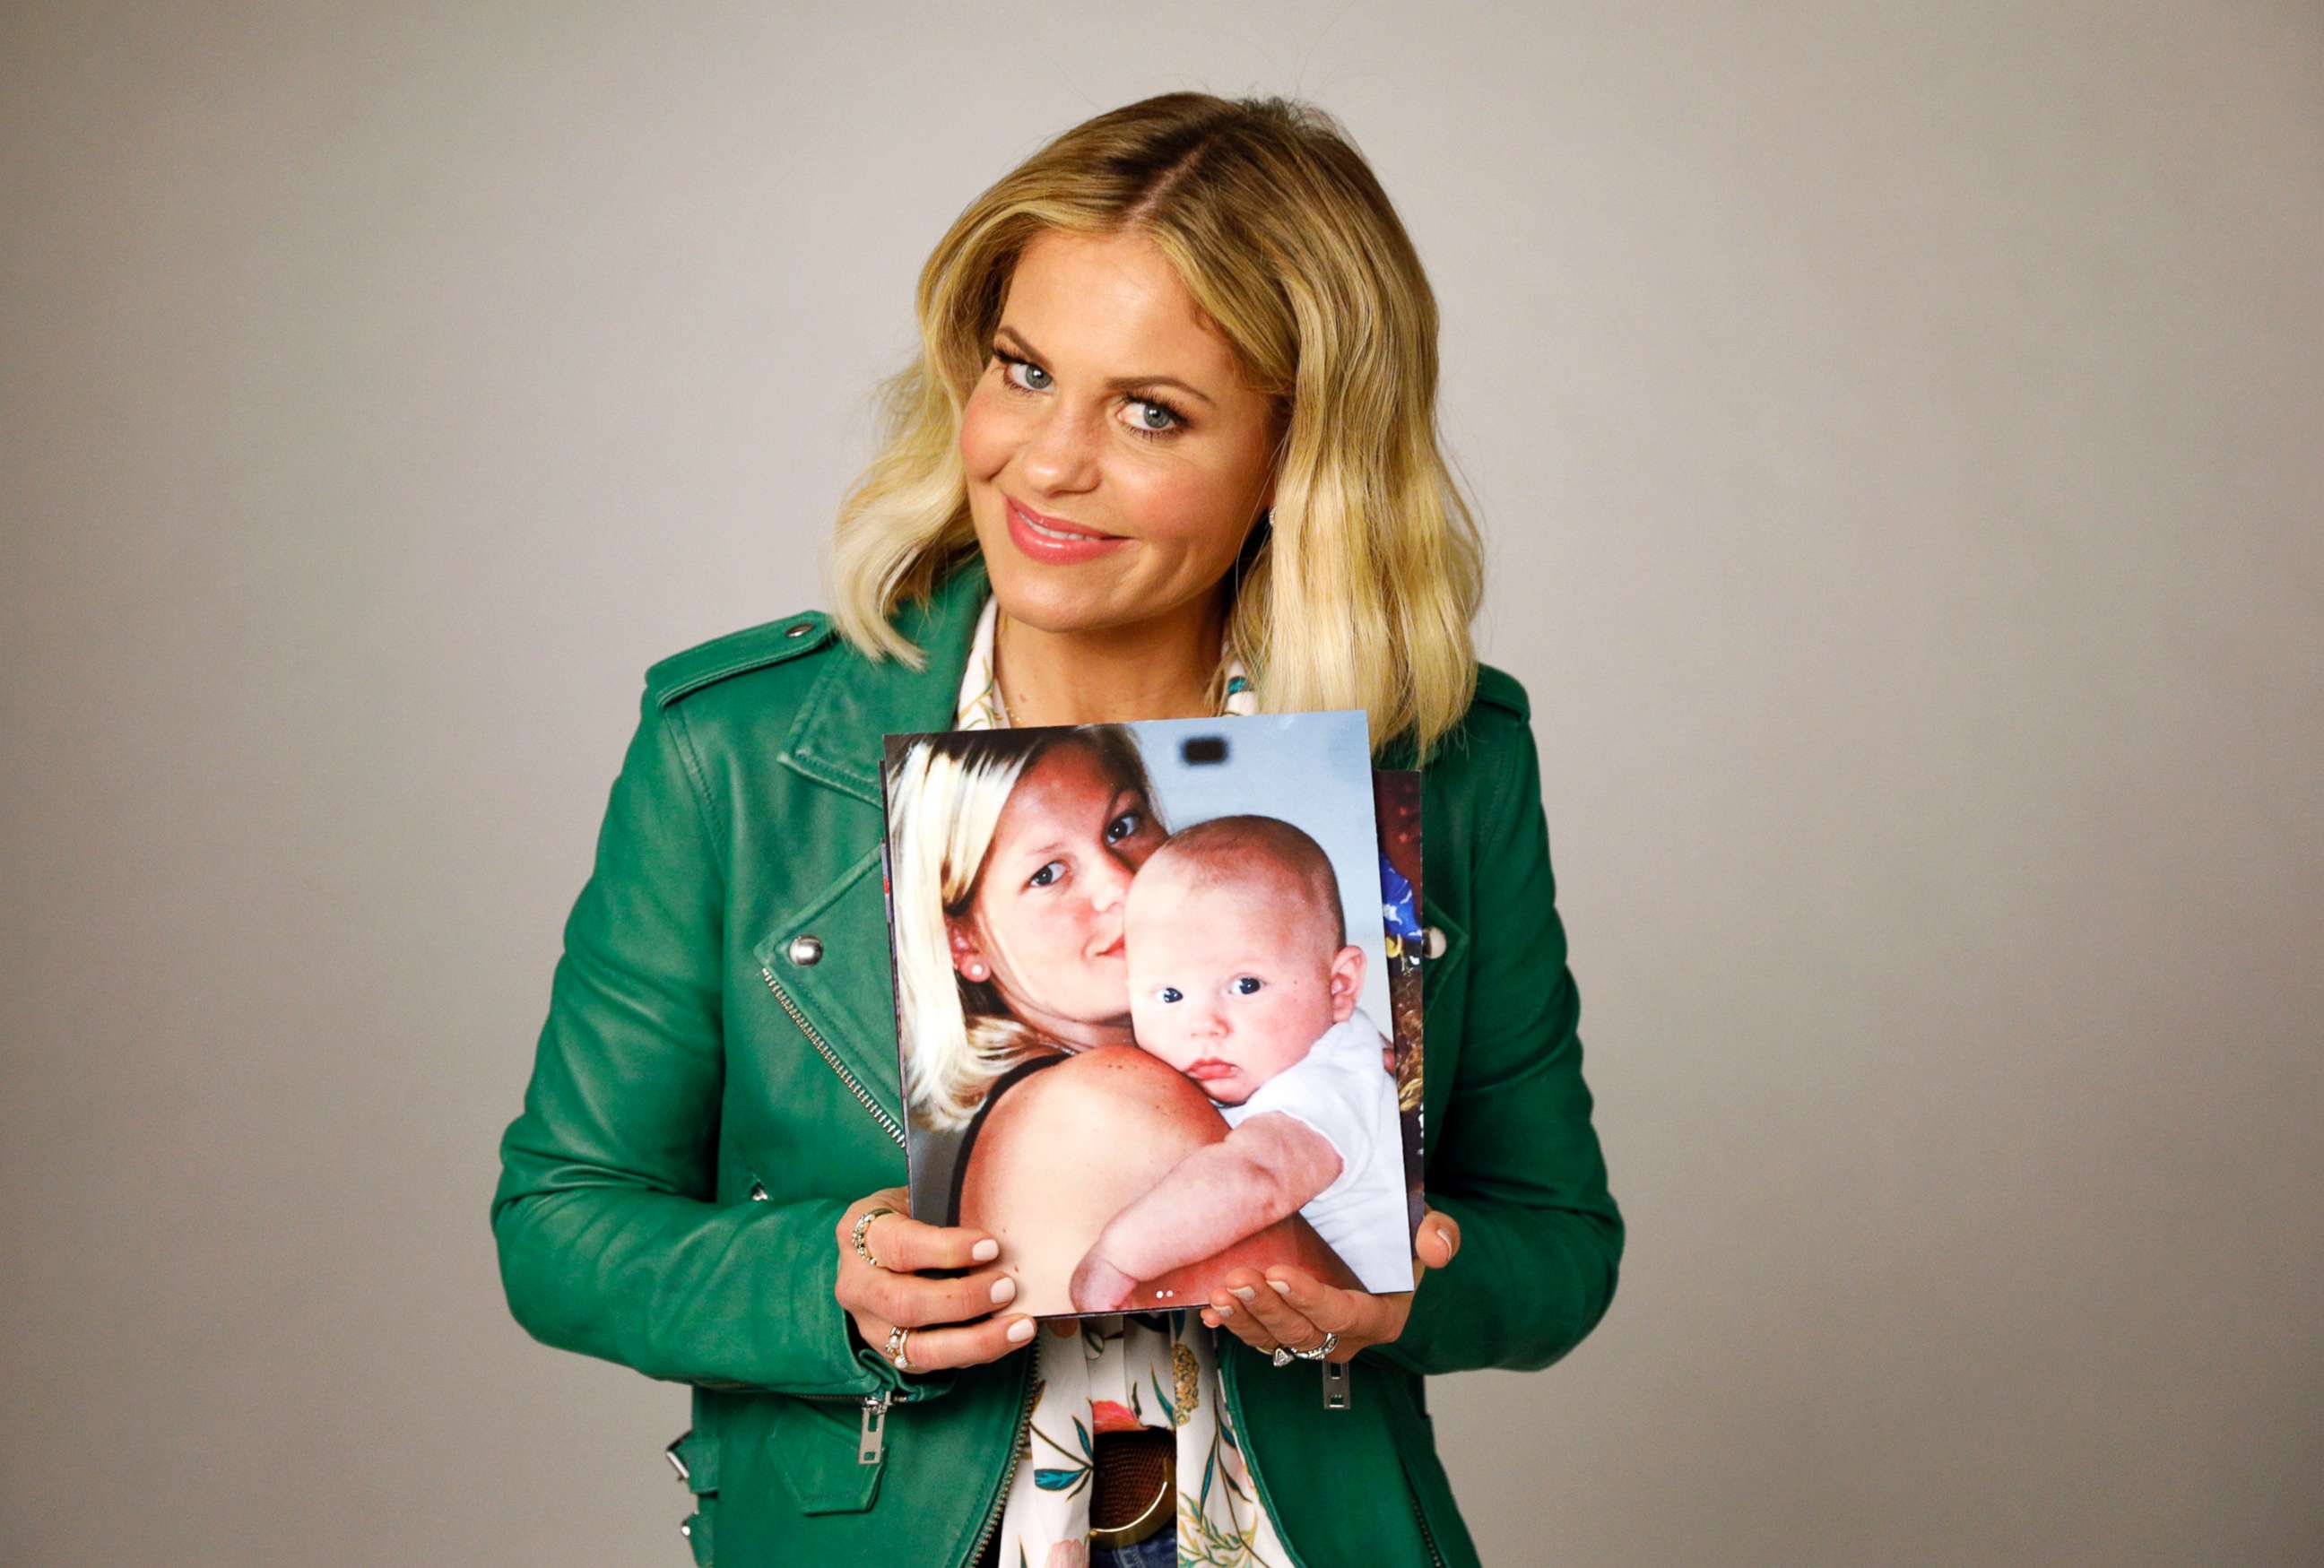 PHOTO: Candace Cameron Bure opens up about temporarily leaving Hollywood to be a stay-at-home mom: "know you're in the exact place you should be."